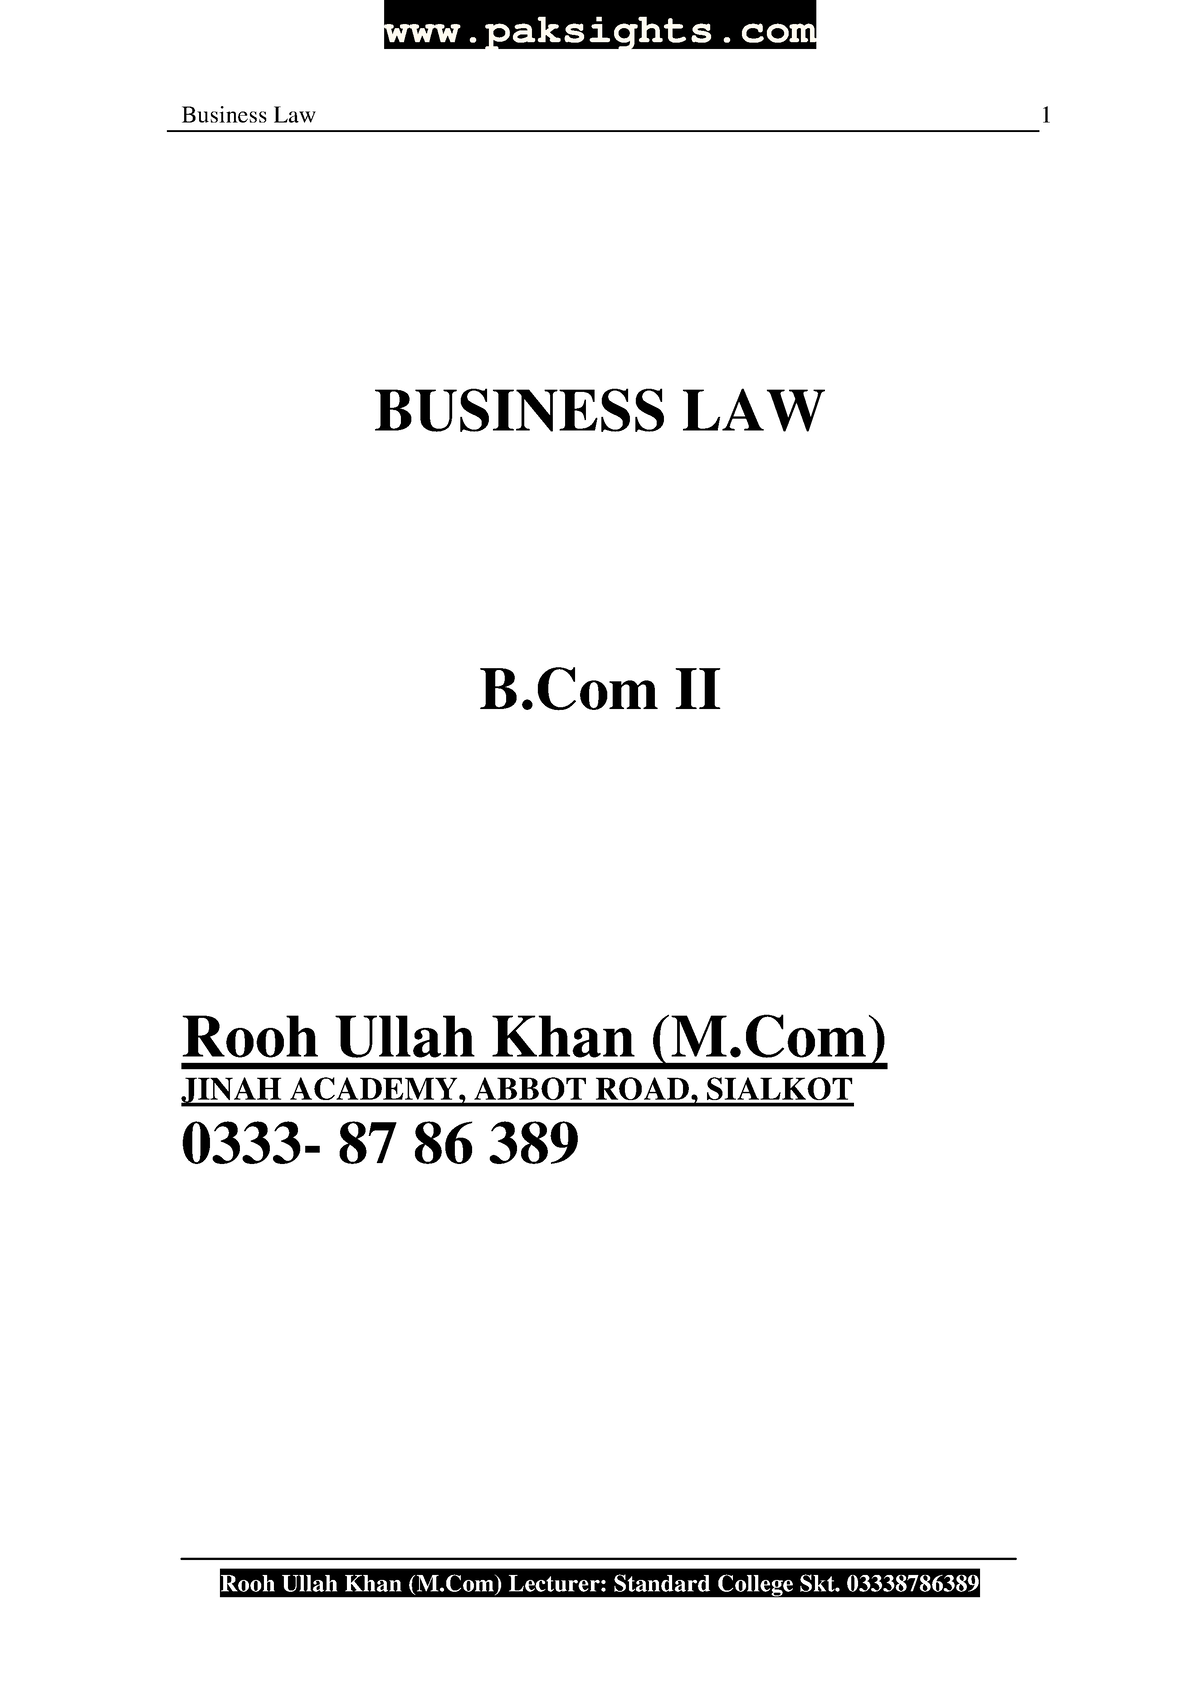 thesis on business law